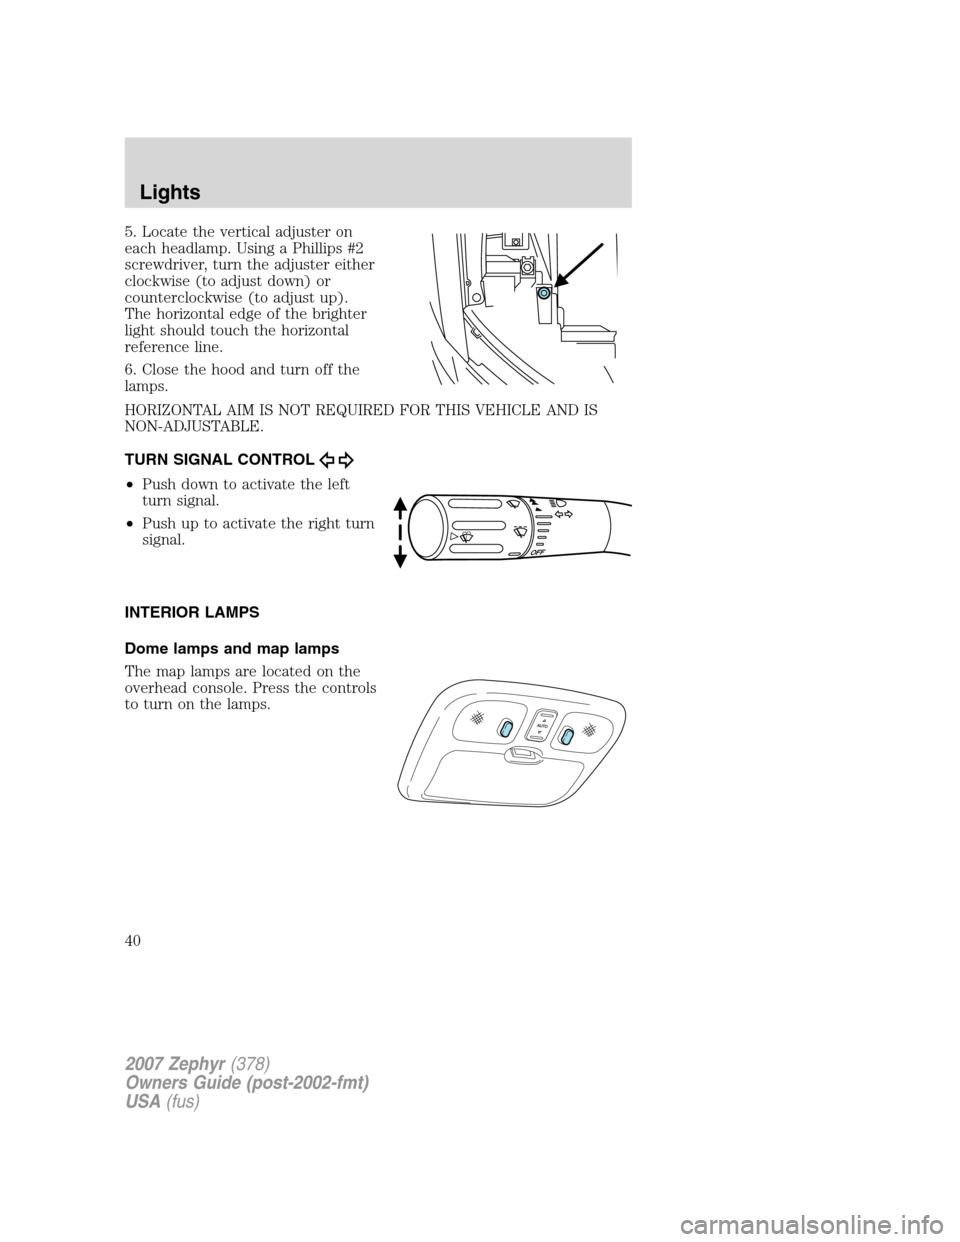 LINCOLN MKZ 2007 Owners Guide 5. Locate the vertical adjuster on
each headlamp. Using a Phillips #2
screwdriver, turn the adjuster either
clockwise (to adjust down) or
counterclockwise (to adjust up).
The horizontal edge of the br